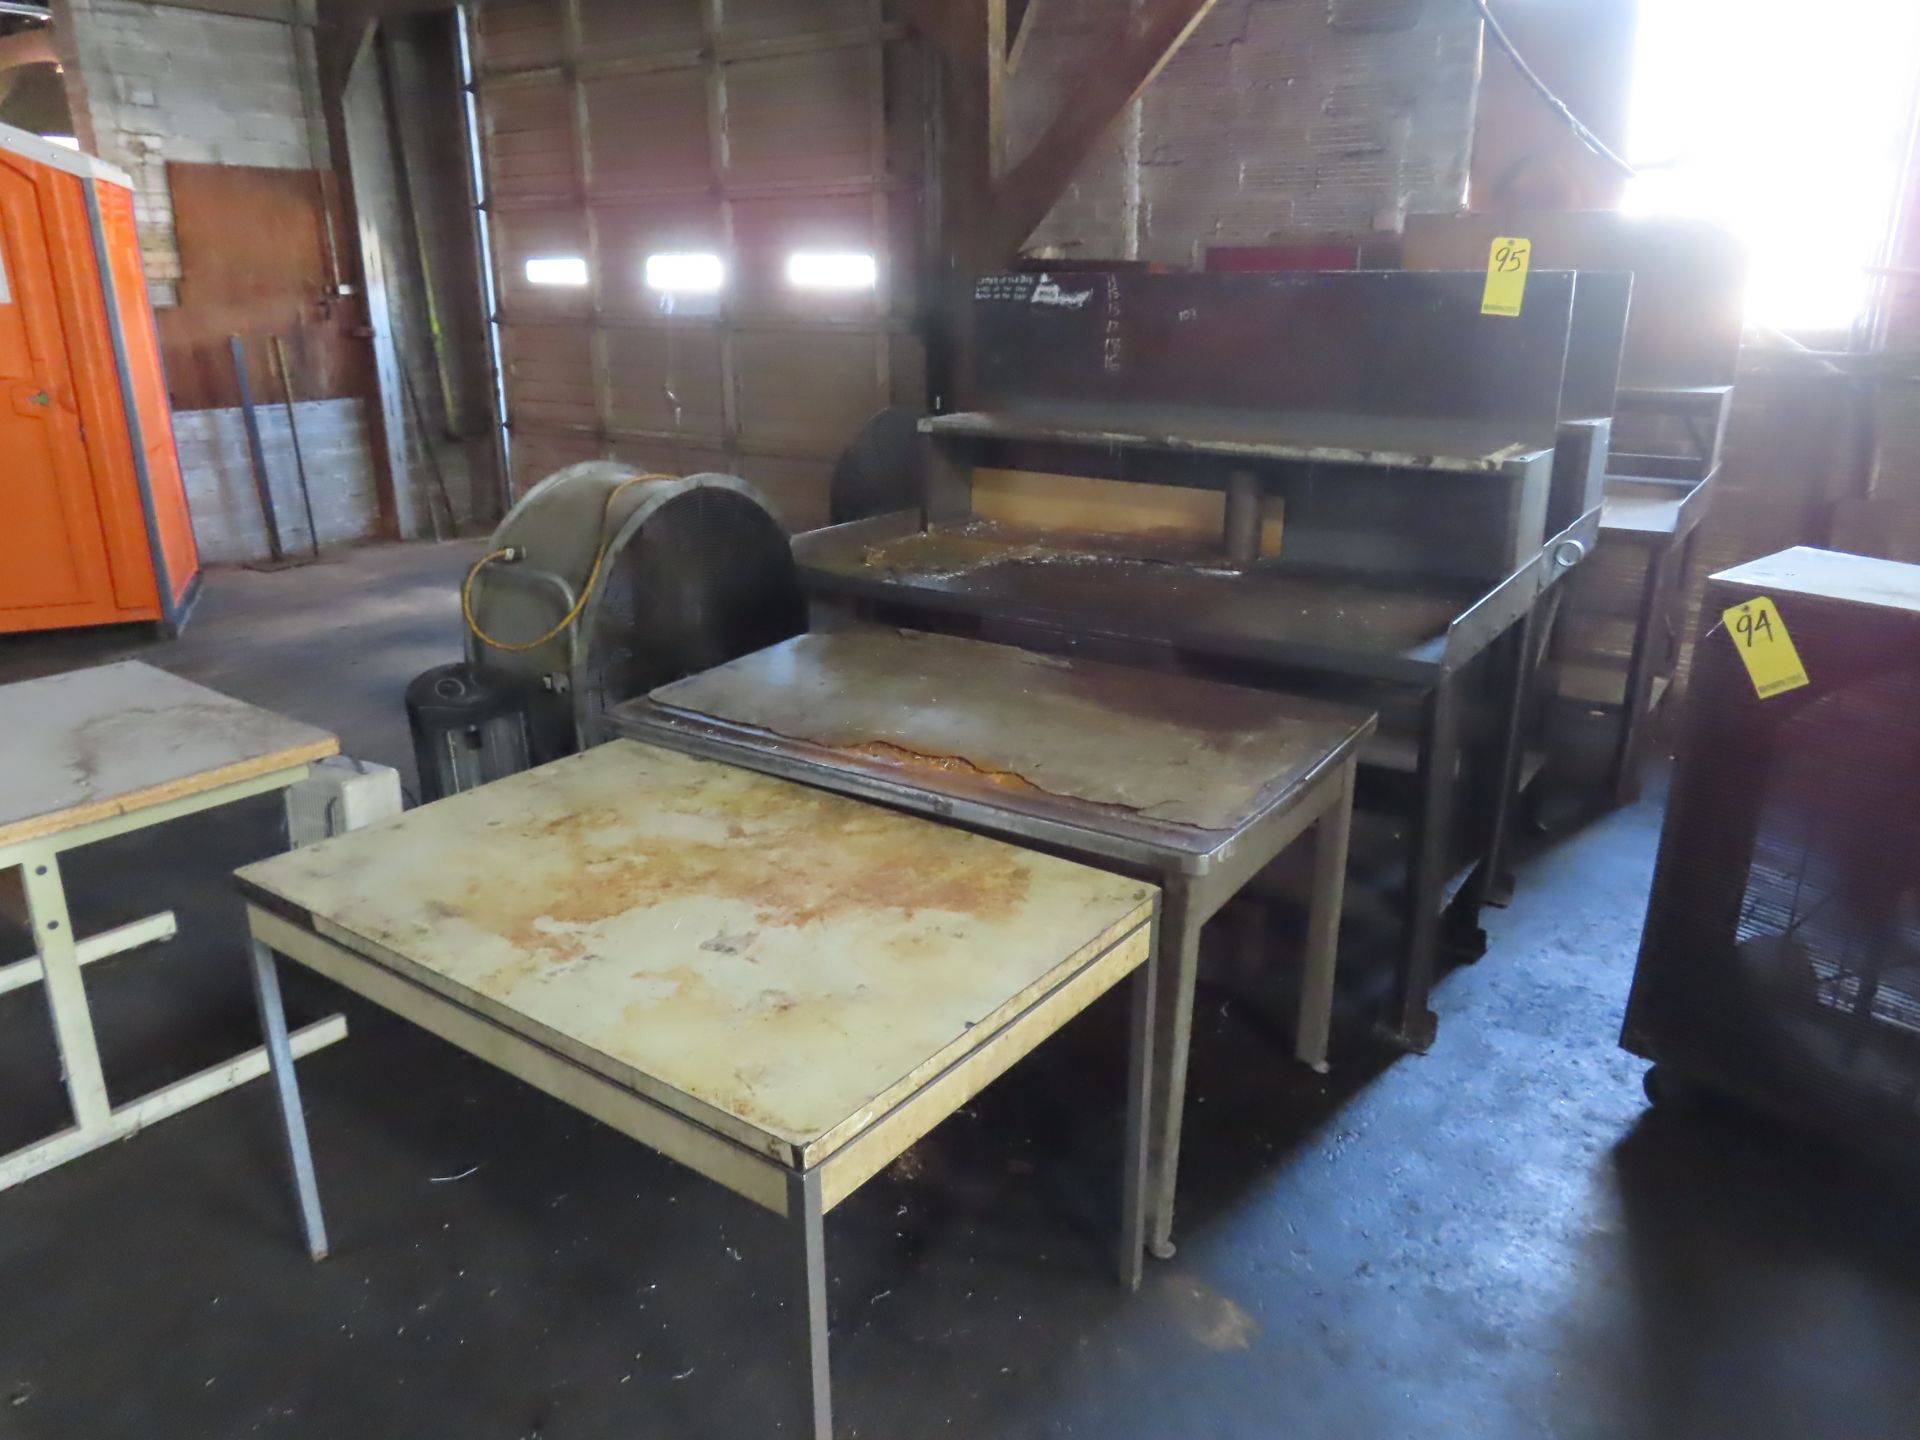 LOT WORK BENCHES & TABLESBLDG: 1 - LOT WORK BENCHES & TABLES - Image 2 of 2